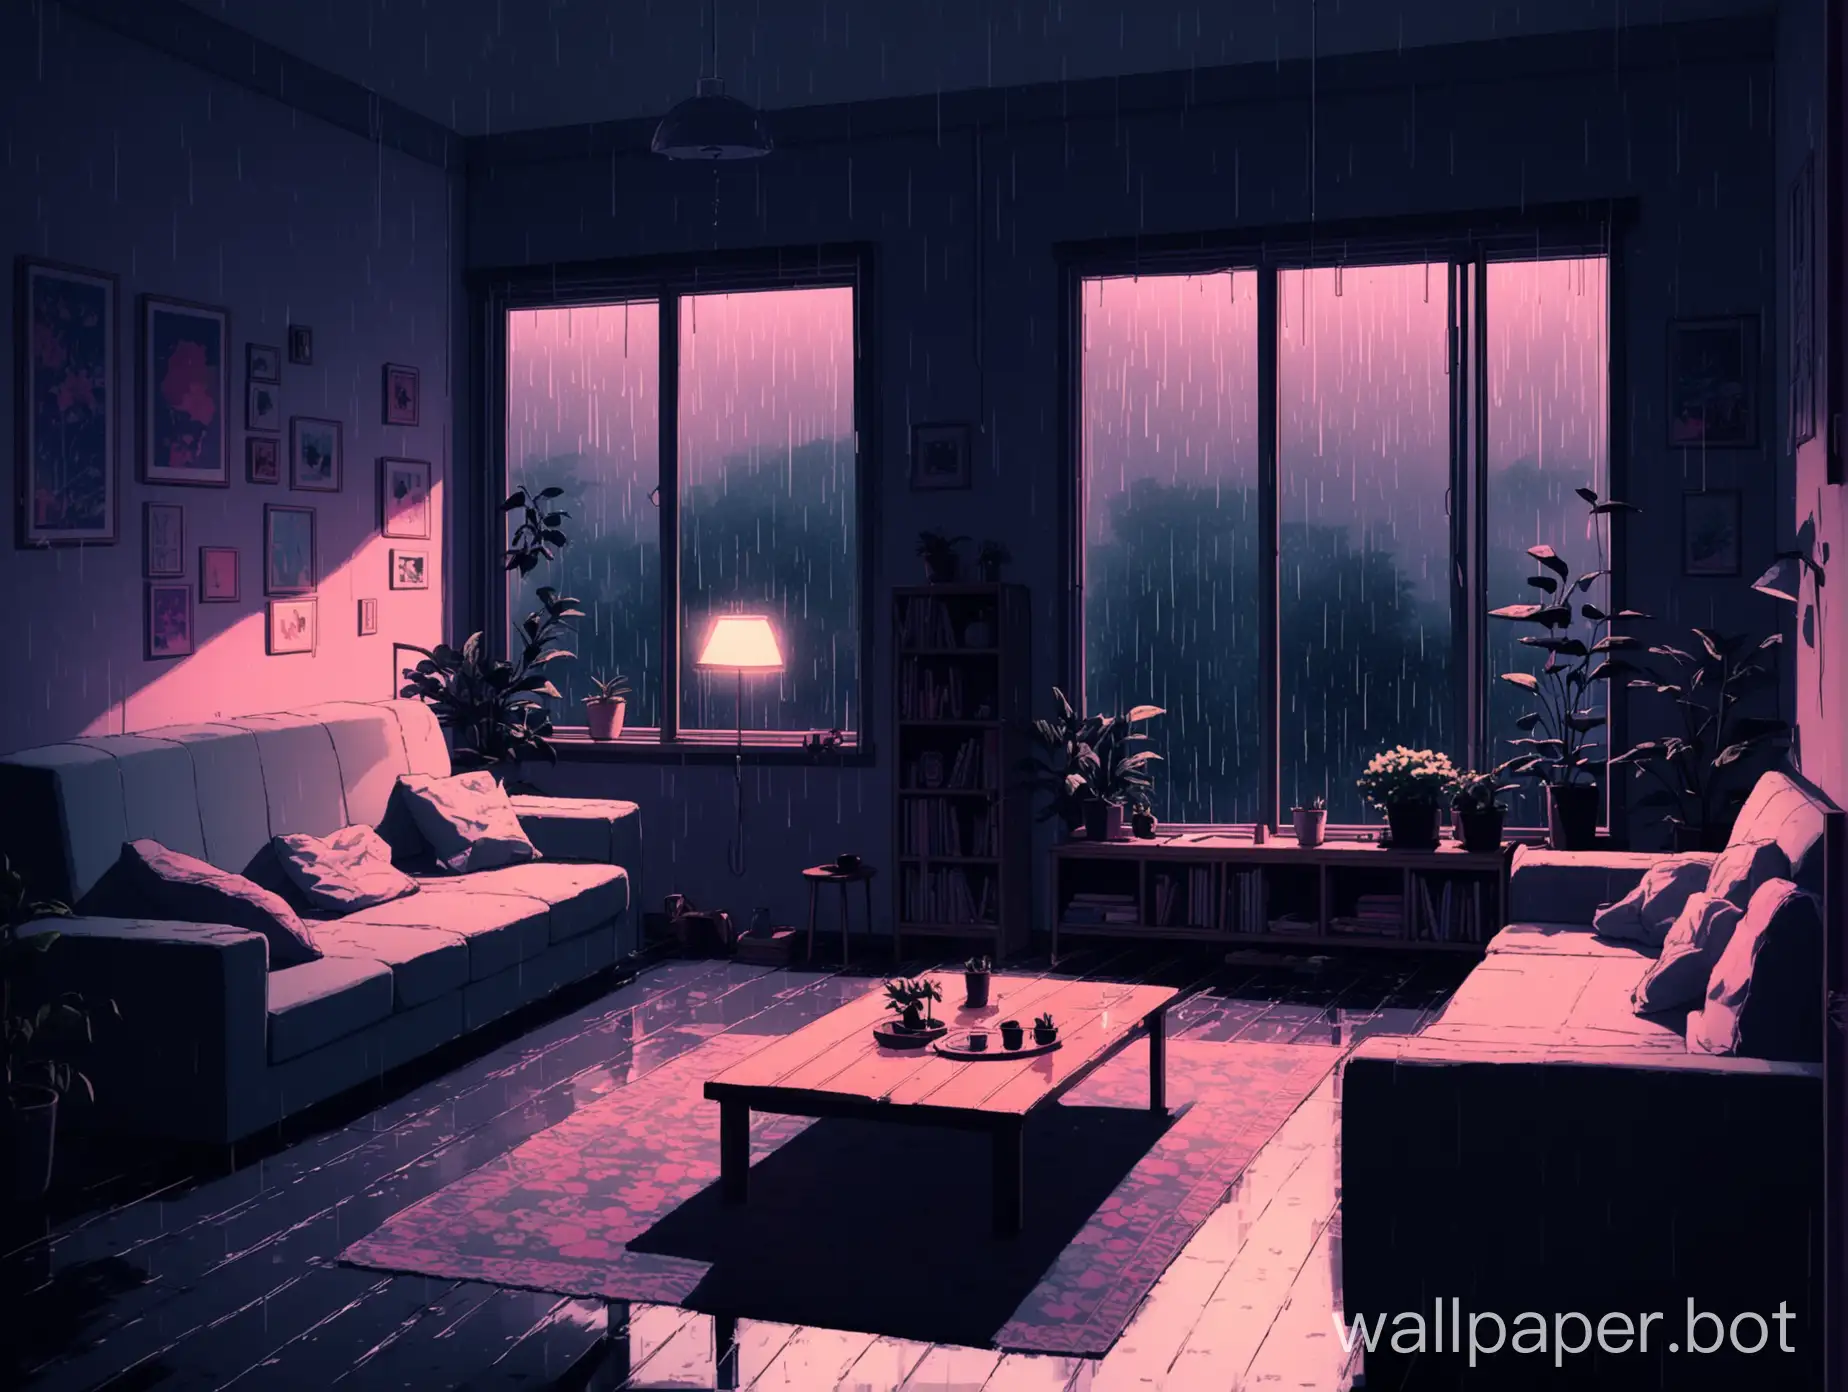 cozy living room with lo-fi vibes and rainy at outside the room, the room a bit dark but have some light, the room have a color pastel.